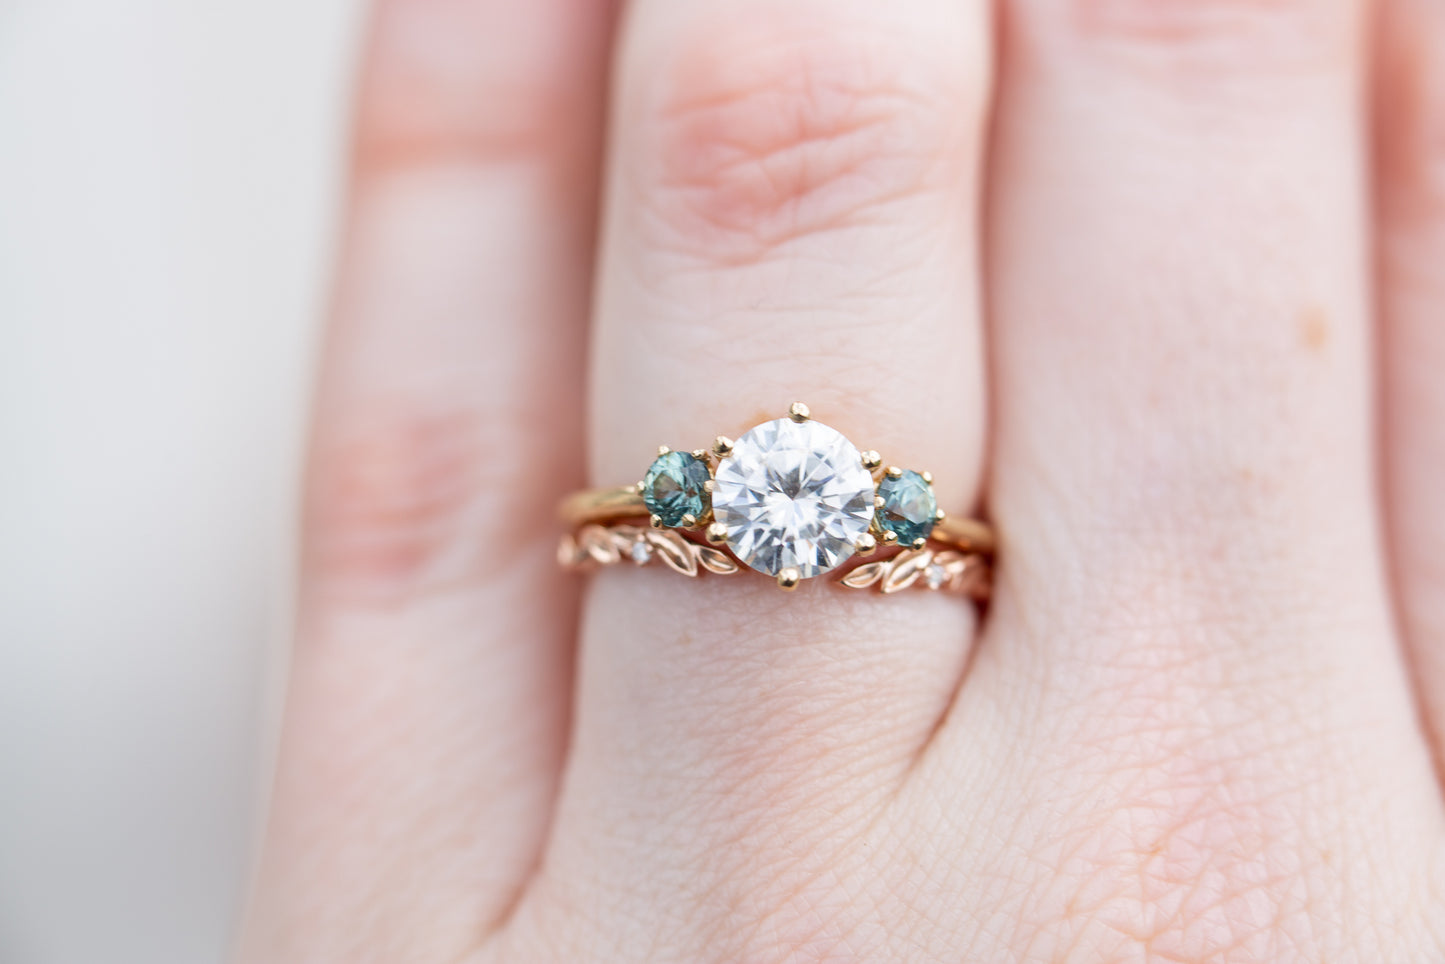 What to Do With Your Wedding Ring After Divorce